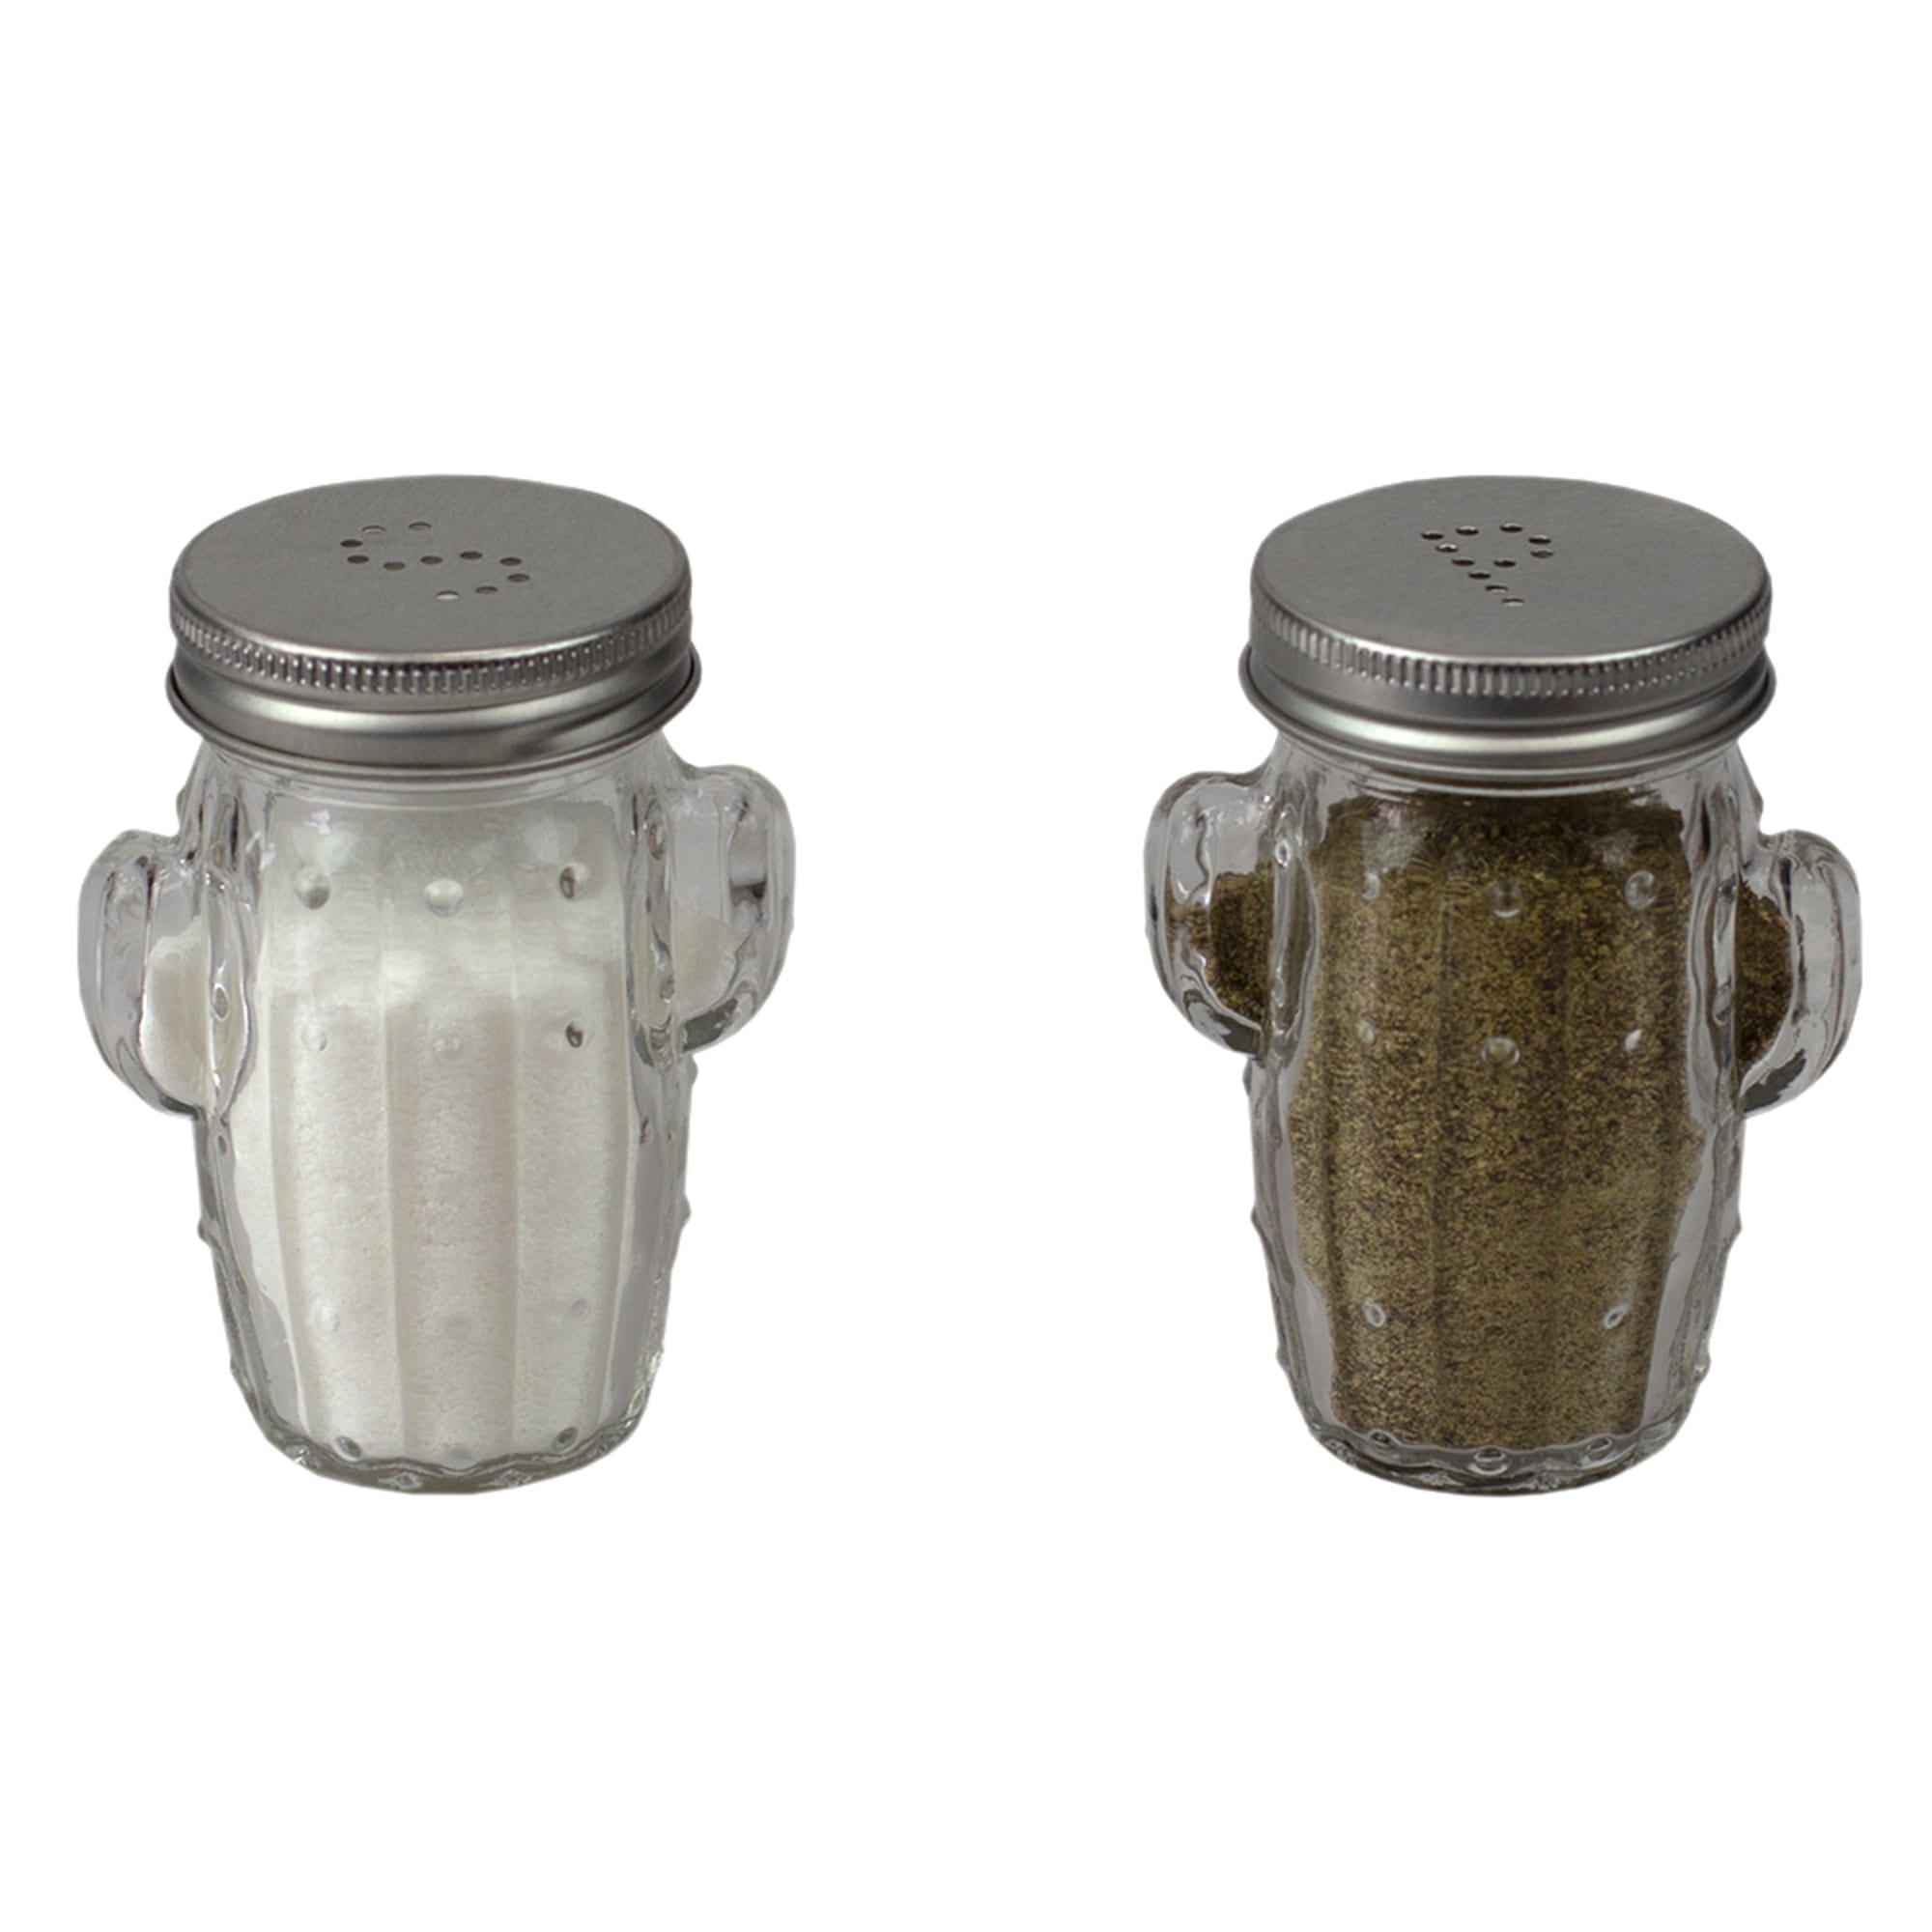 Home Basics  Cactus Glass 3 oz. Salt and Pepper Set with Perforated Labeled Stainless Steel Sifter Top, (Set of 2), Clear $2 EACH, CASE PACK OF 24